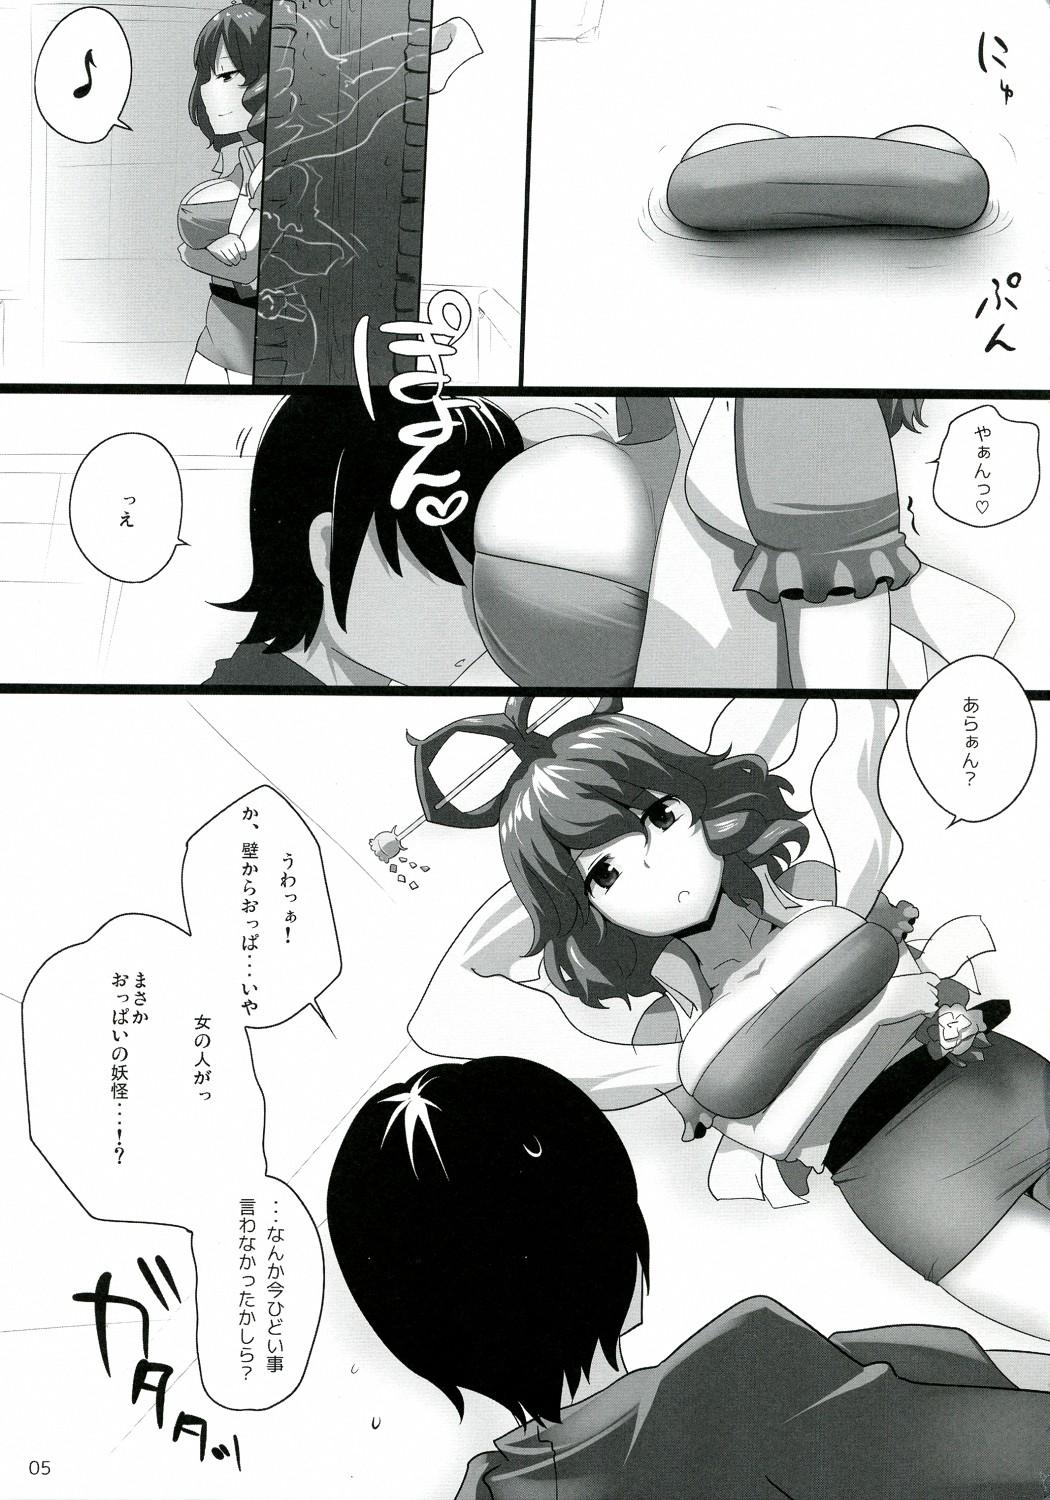 Vagina Touhou Derebitch 9 - Touhou project Role Play - Page 5